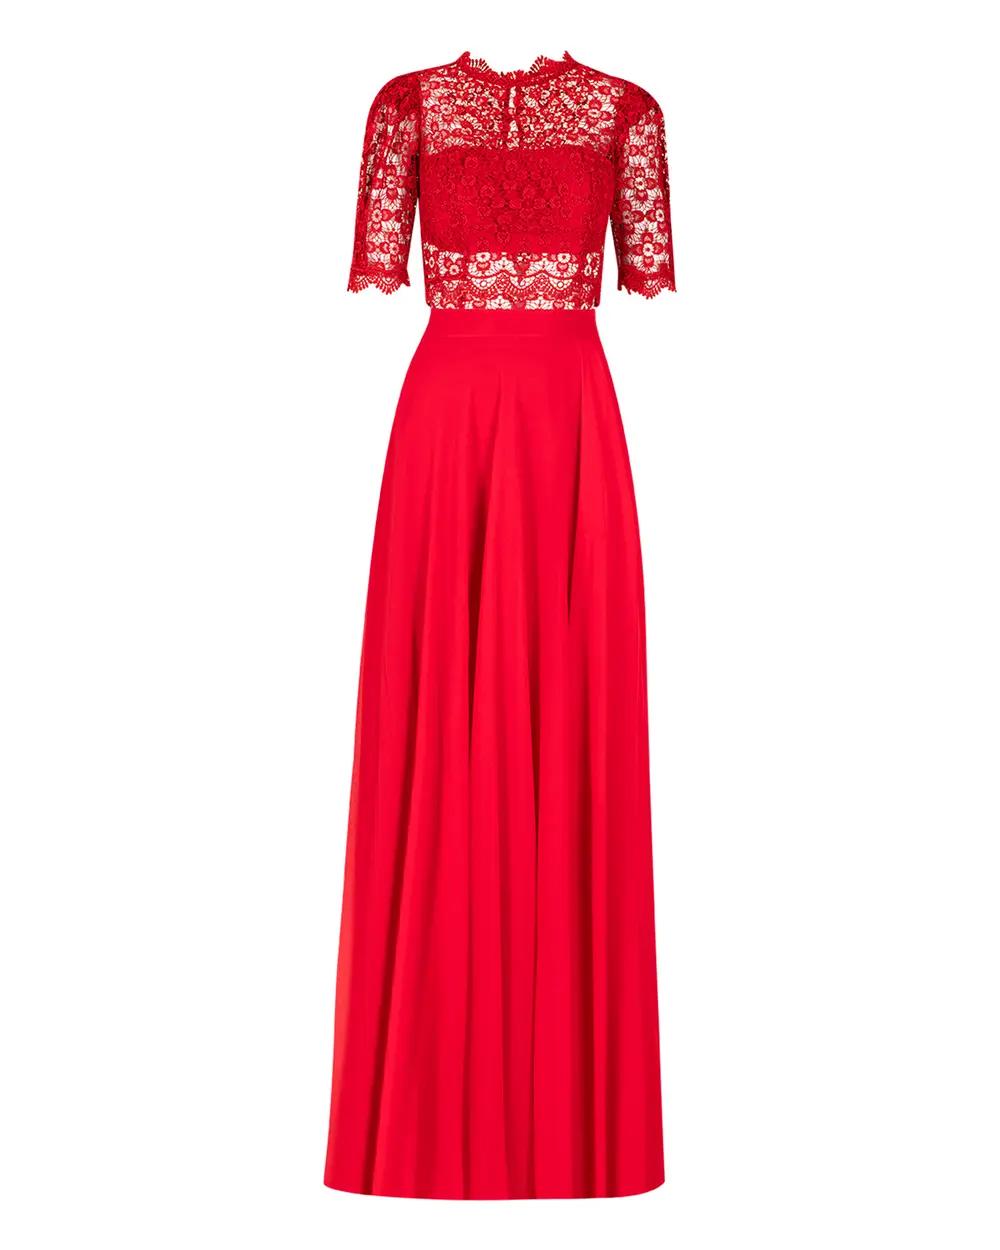 Lace Detailed Two Piece Evening Dress